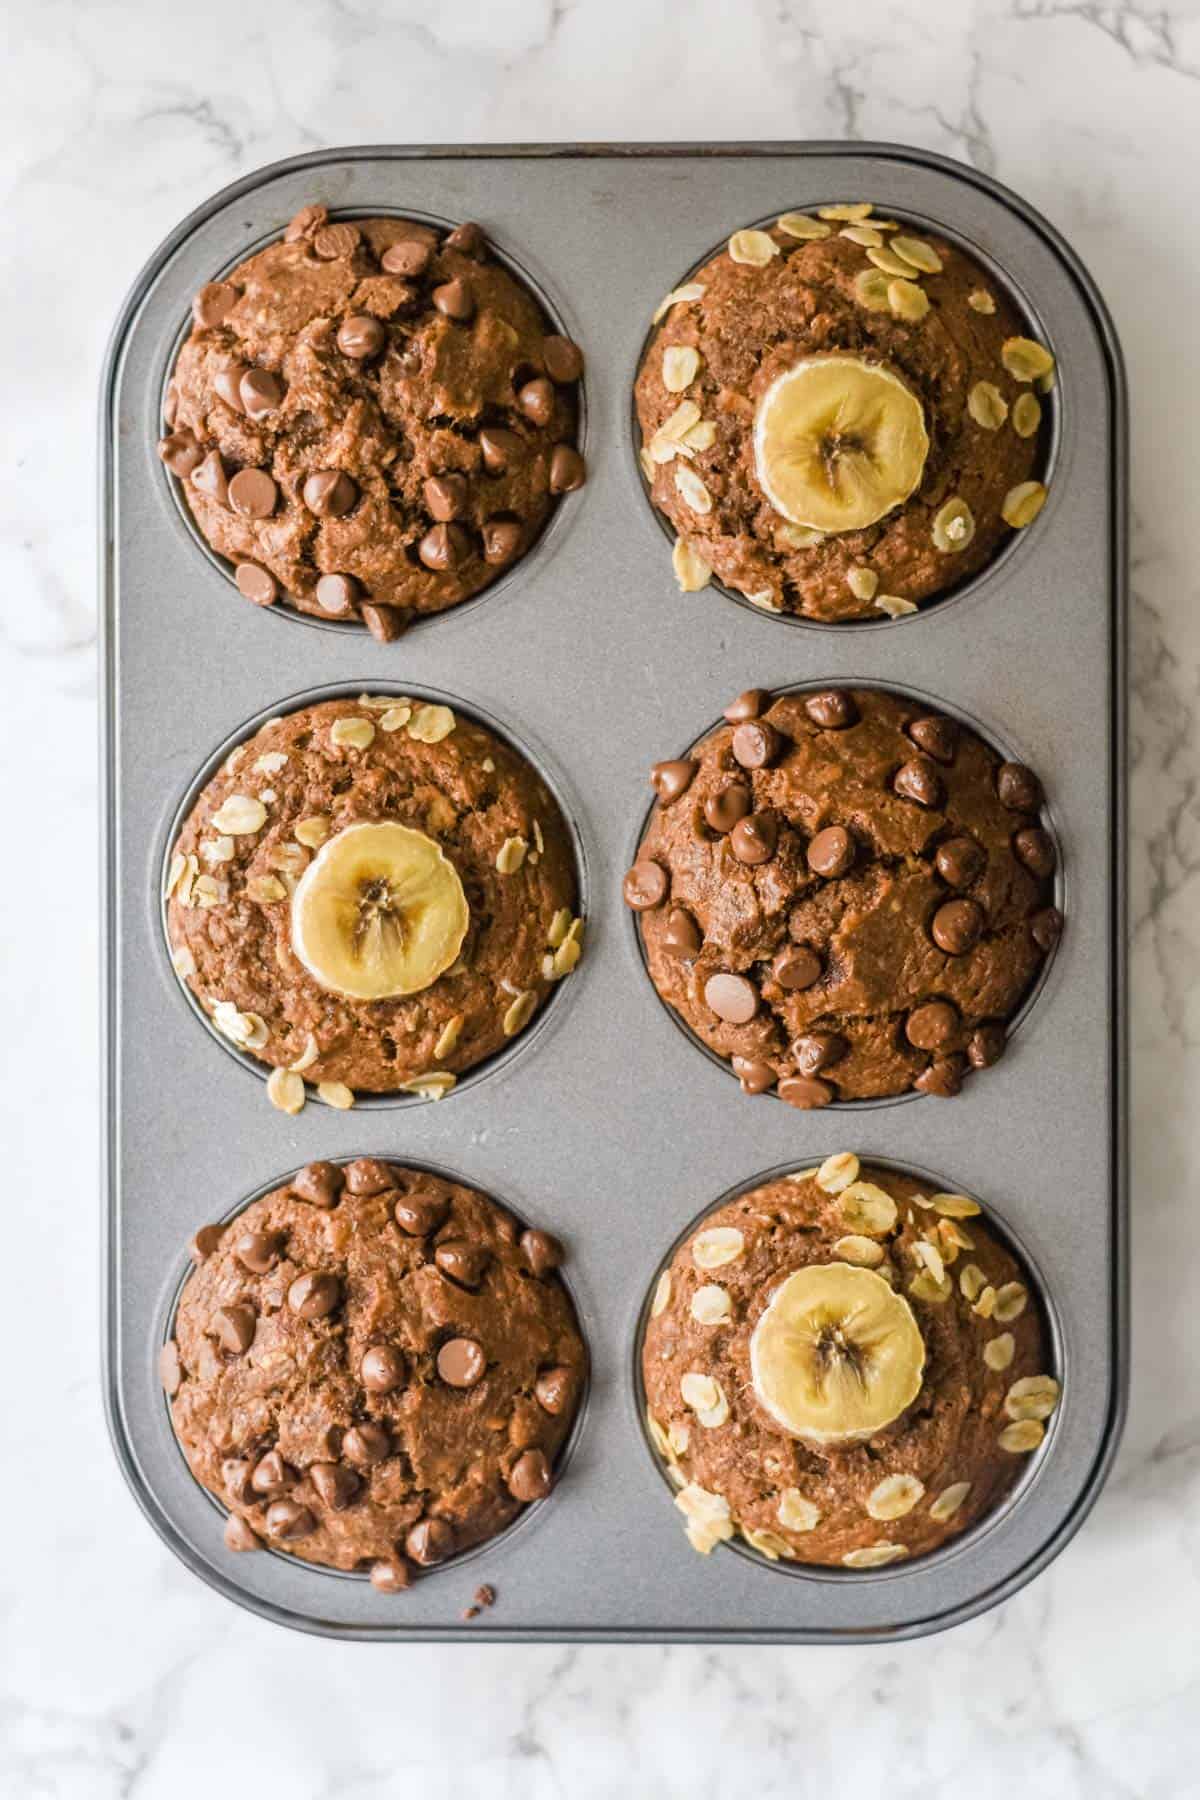 six baked muffins topped with banana and chocolate chips